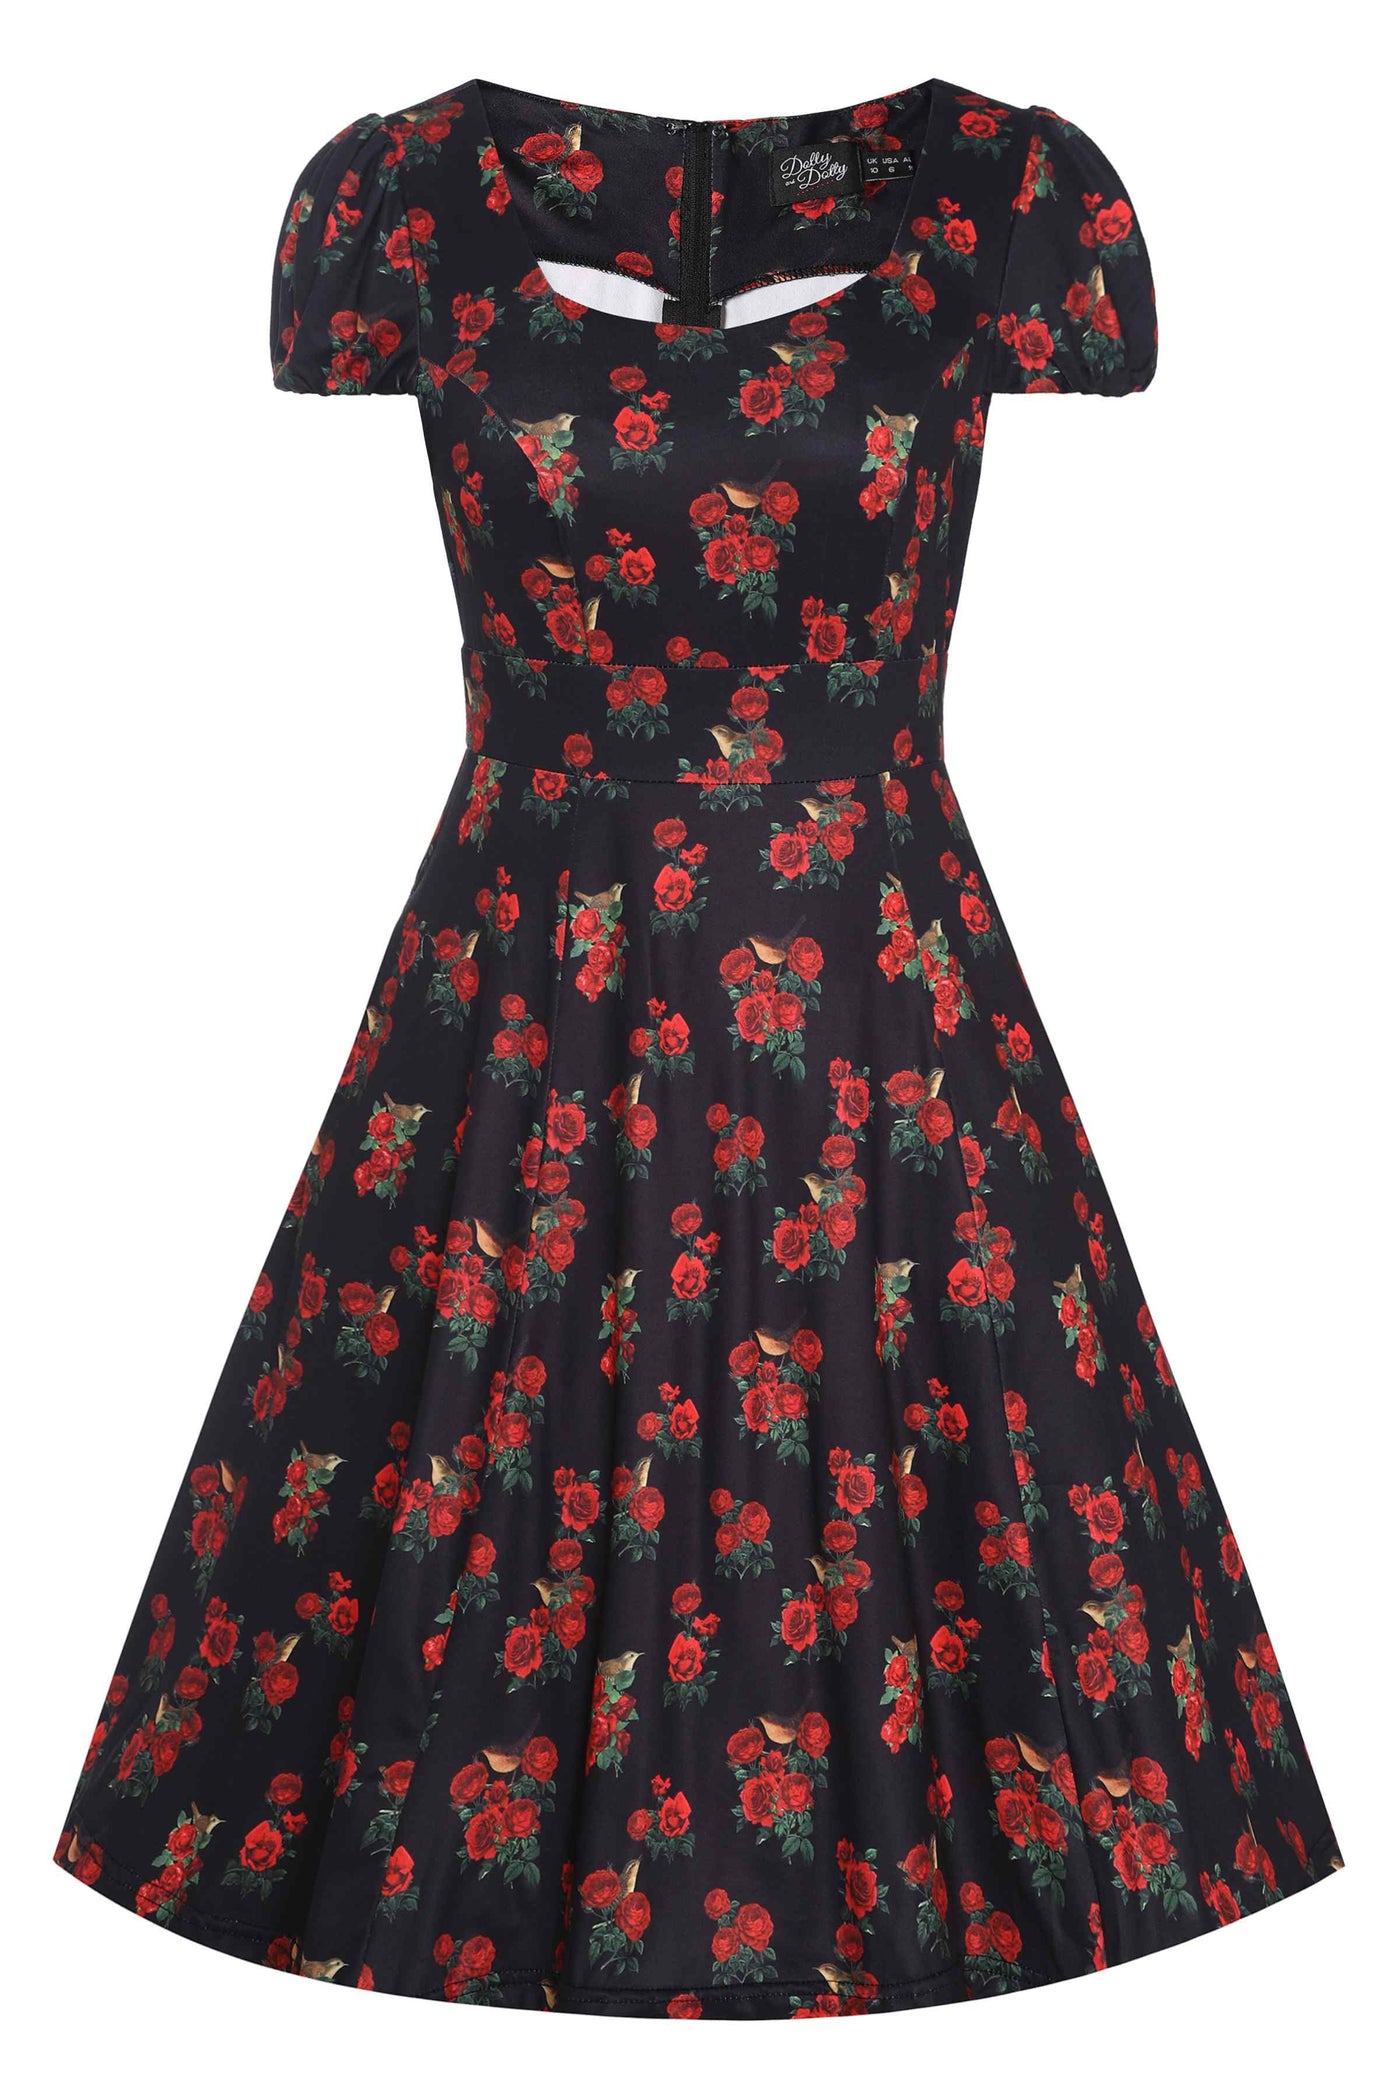 Front View of Red Rose and Bird Cap Sleeved Swing Dress in black